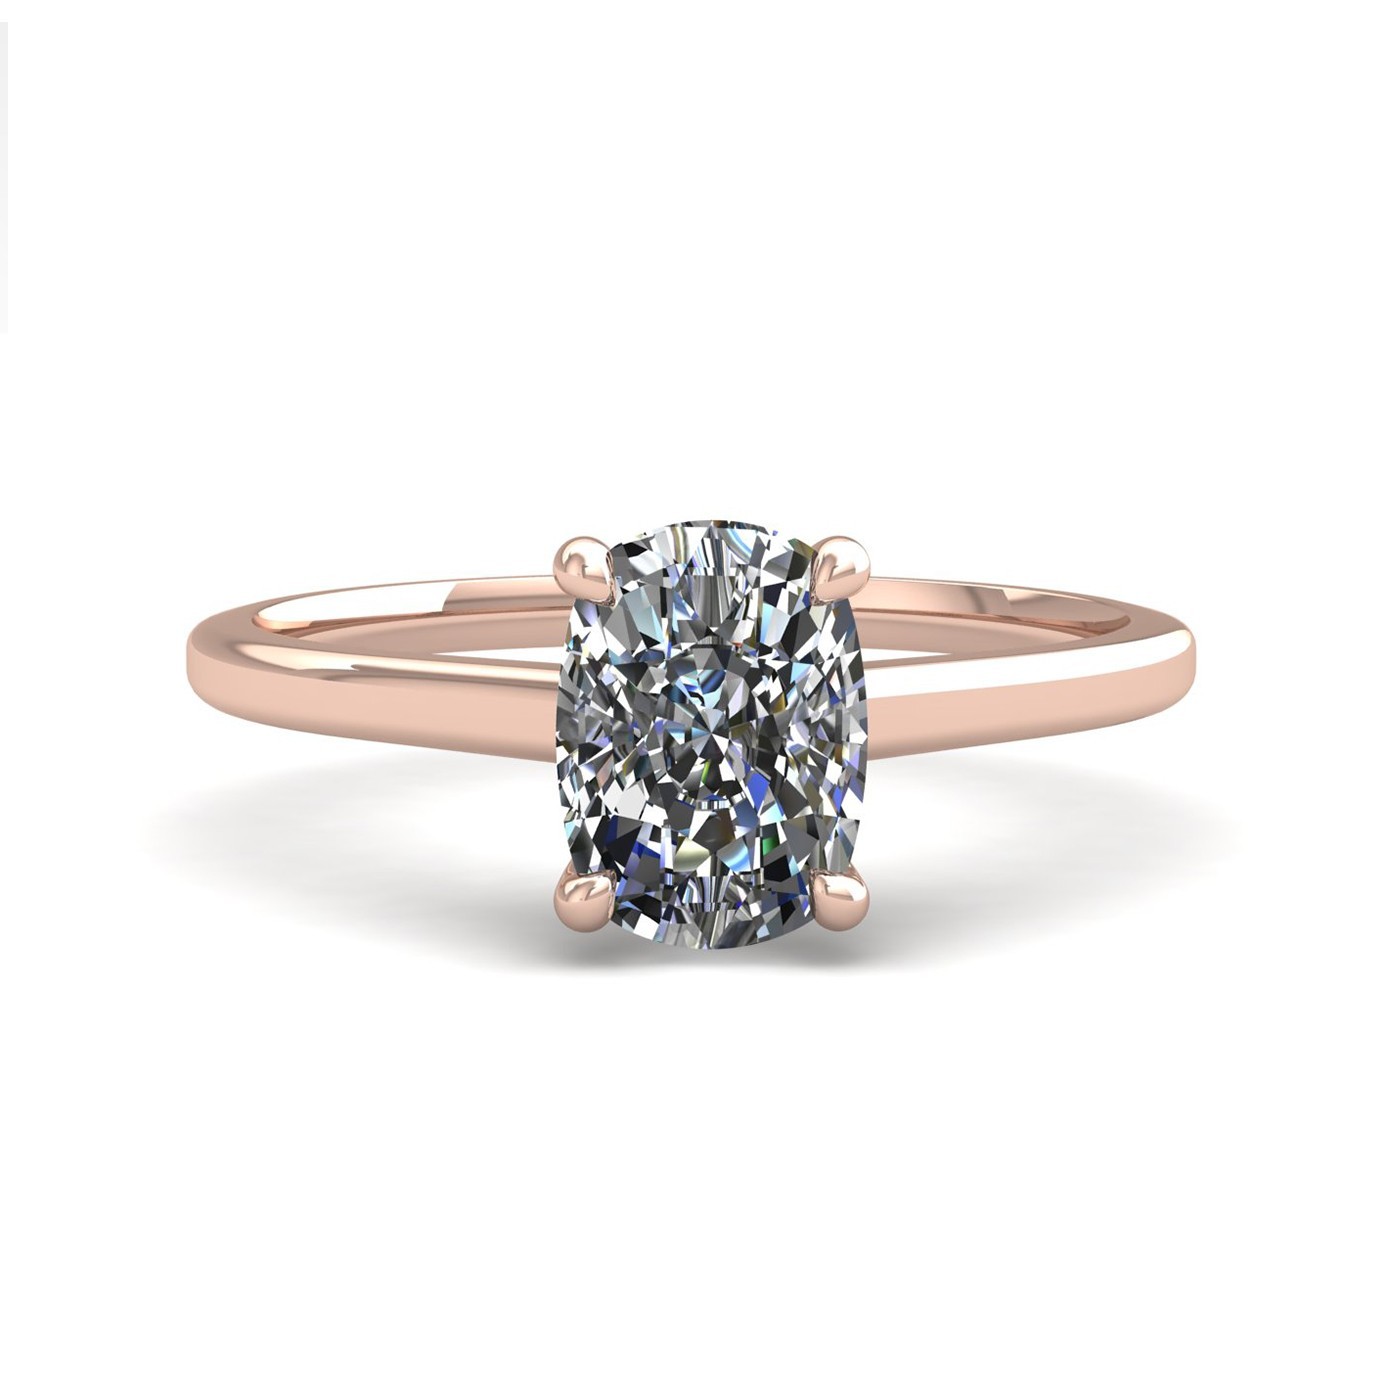 18k rose gold  1.50 ct 4 prongs solitaire elongated cushion cut diamond engagement ring with whisper thin band Photos & images